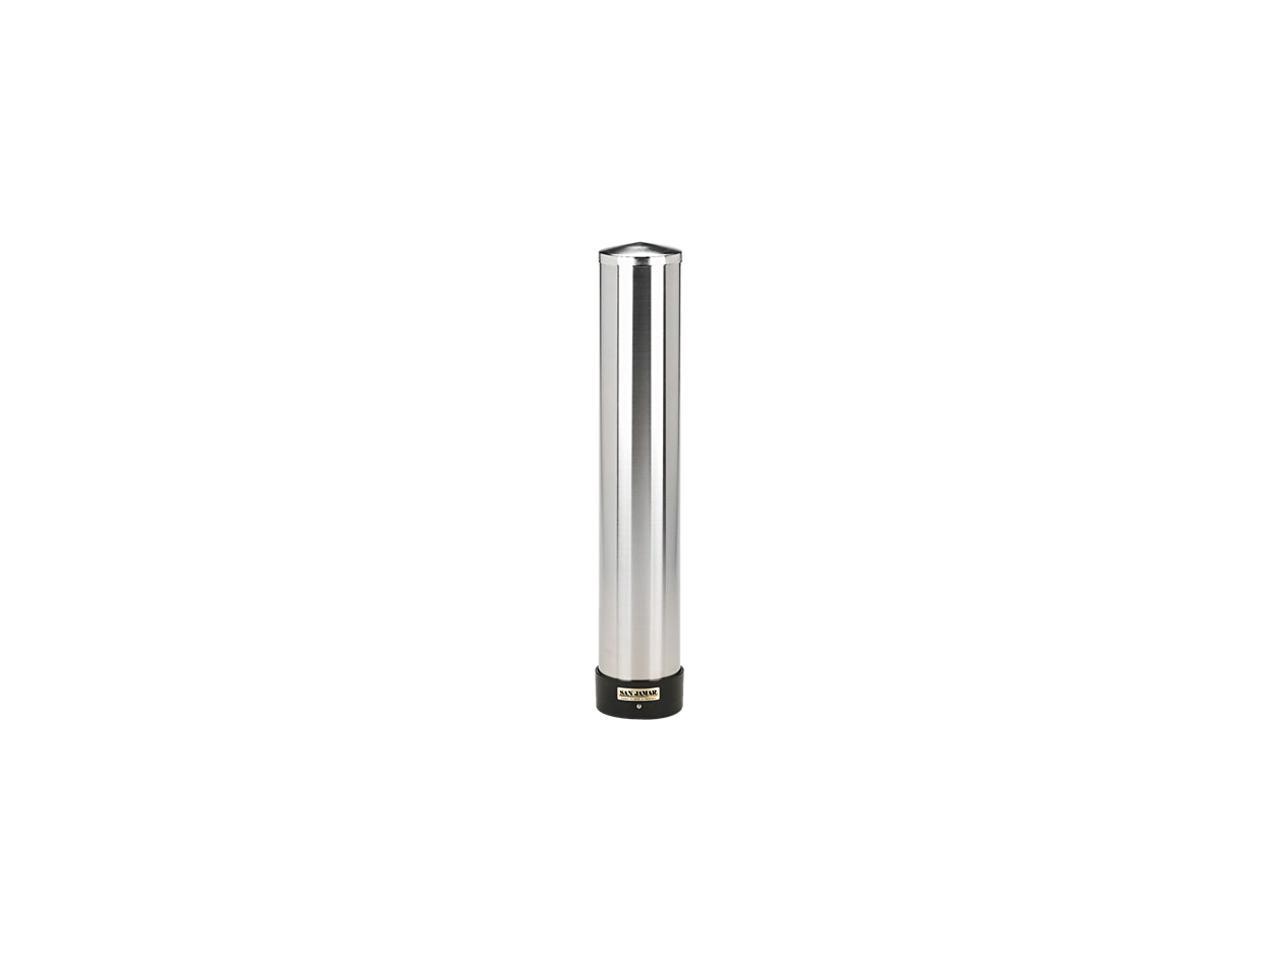 San Jamar C3400P Large Water Cup Dispenser w/Removable Cap,Wall Mounted, Stainless Steel - image 1 of 8